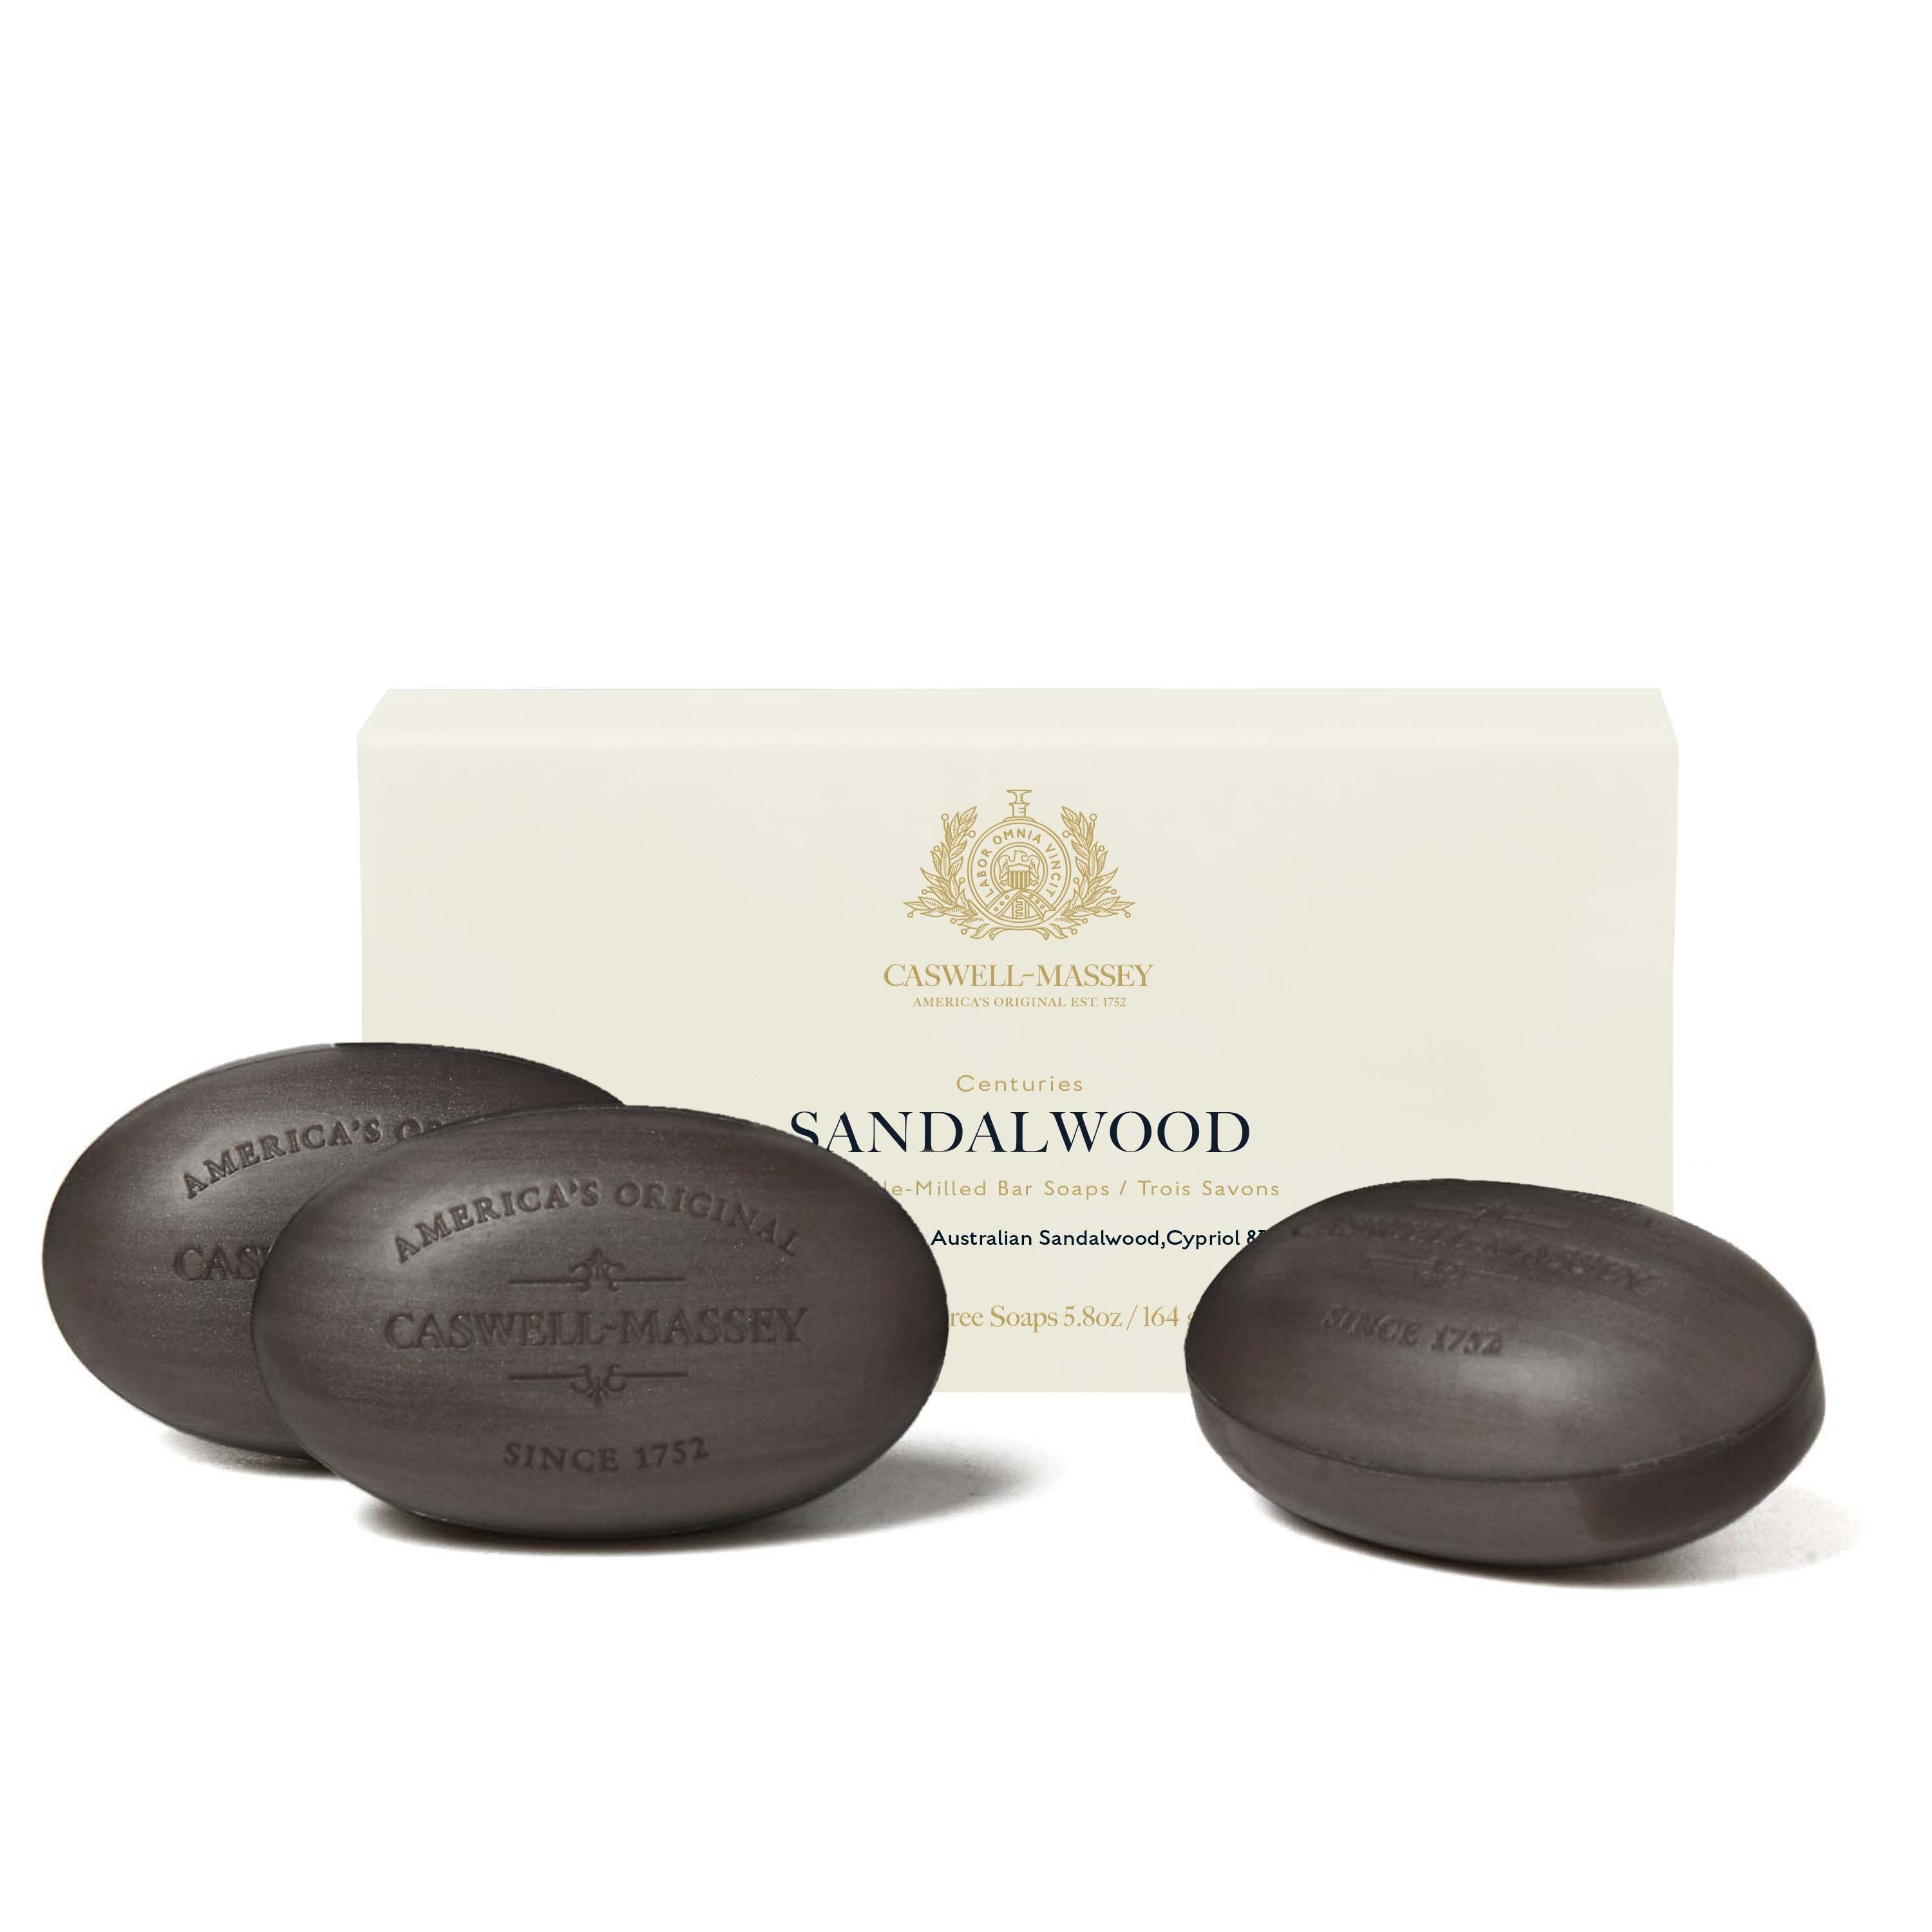 Caswell-Massey® Centuries Sandalwood 3-Soap Set shown next to cream gift box alongside grey bars of soap